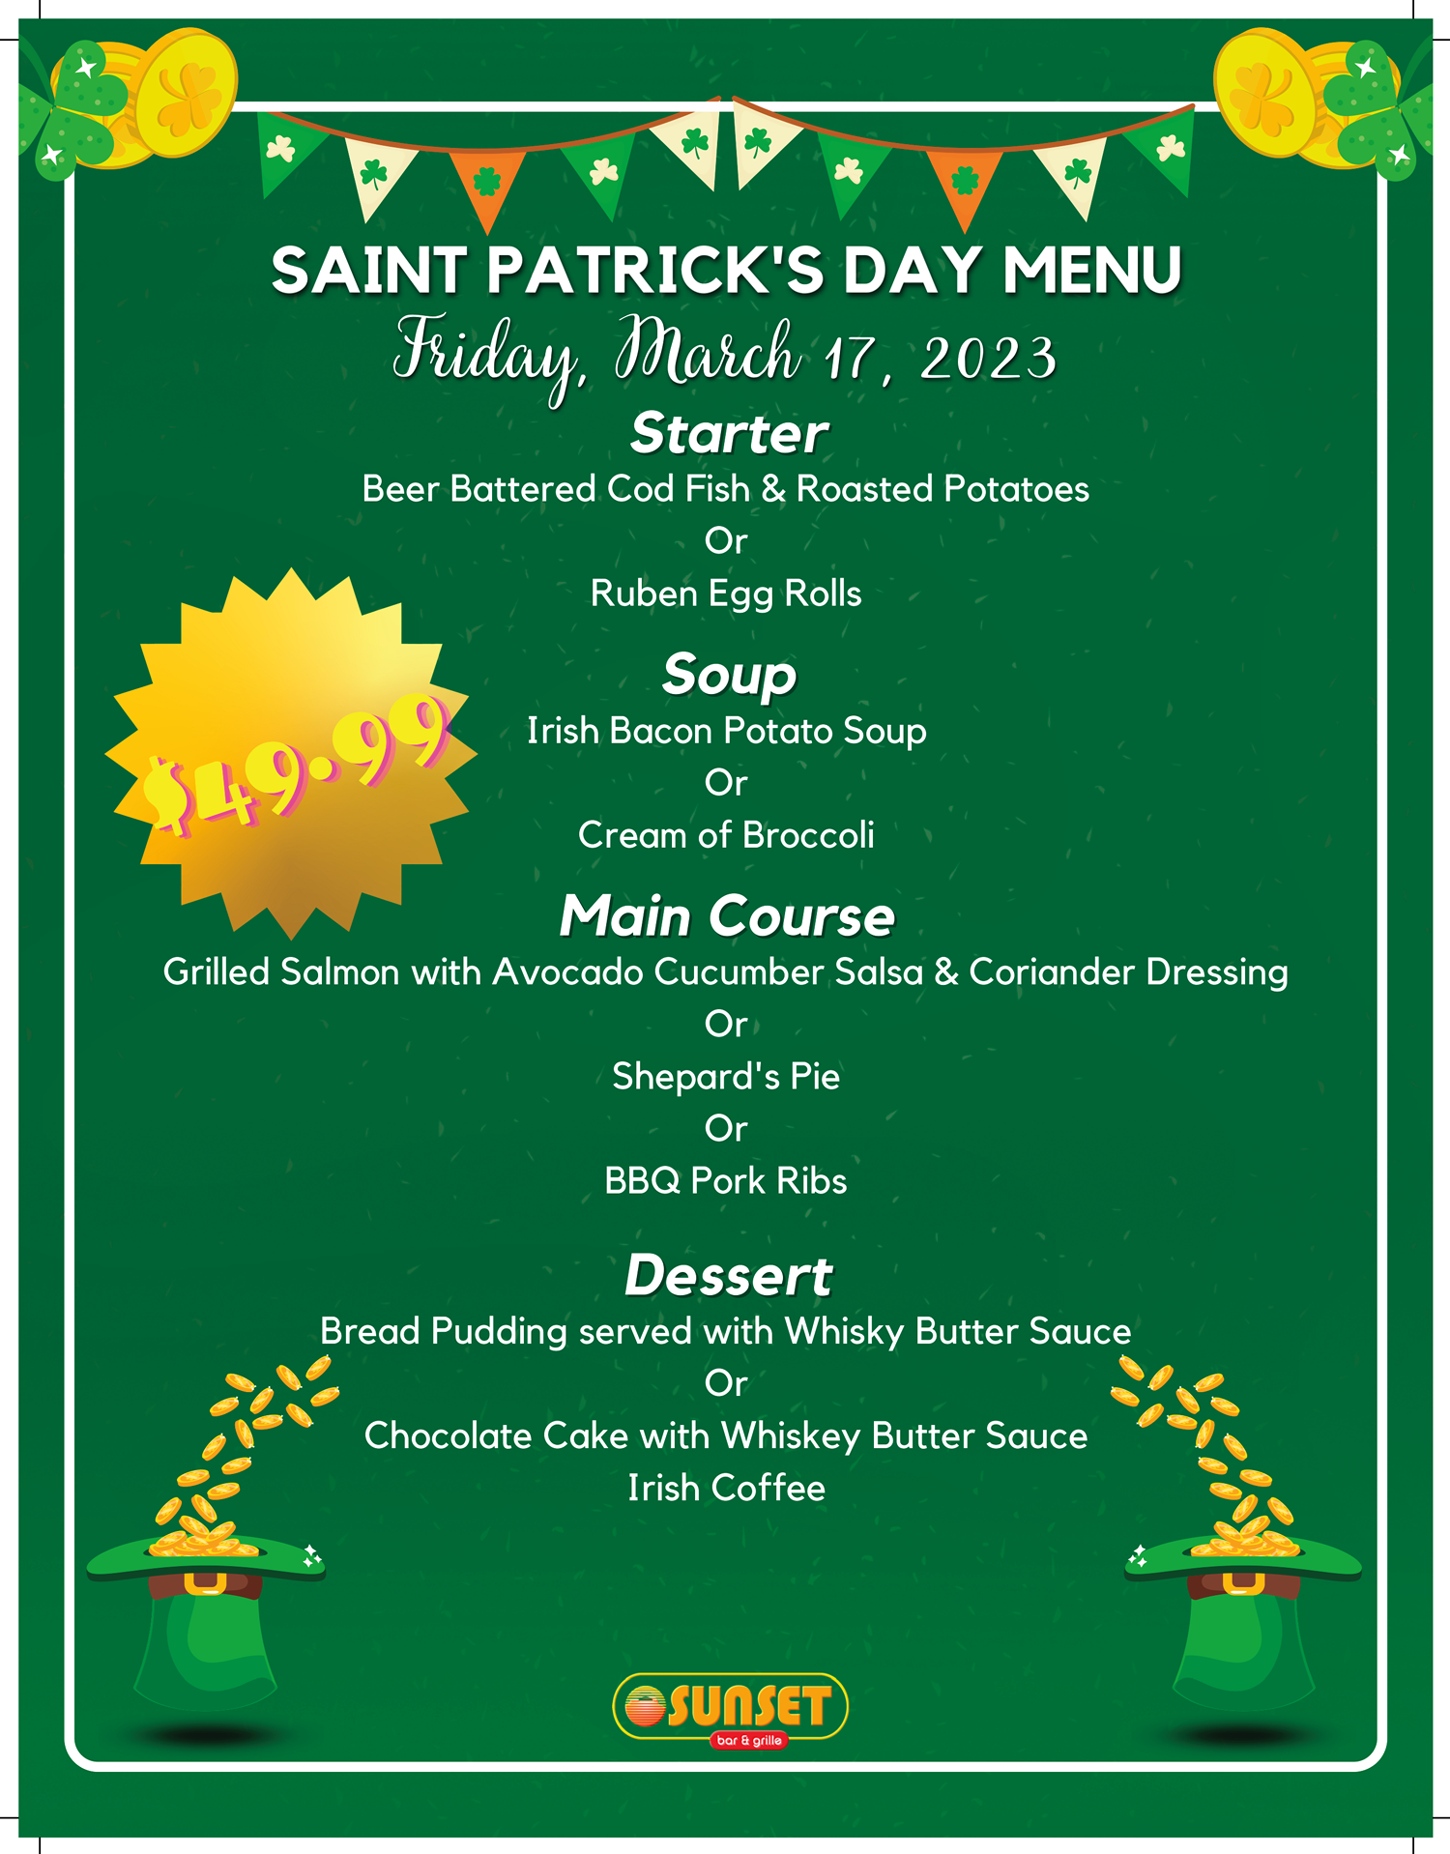 Saint Patrick's Day Menu for Sunset Bar & Grille in Trinidad, Colorado